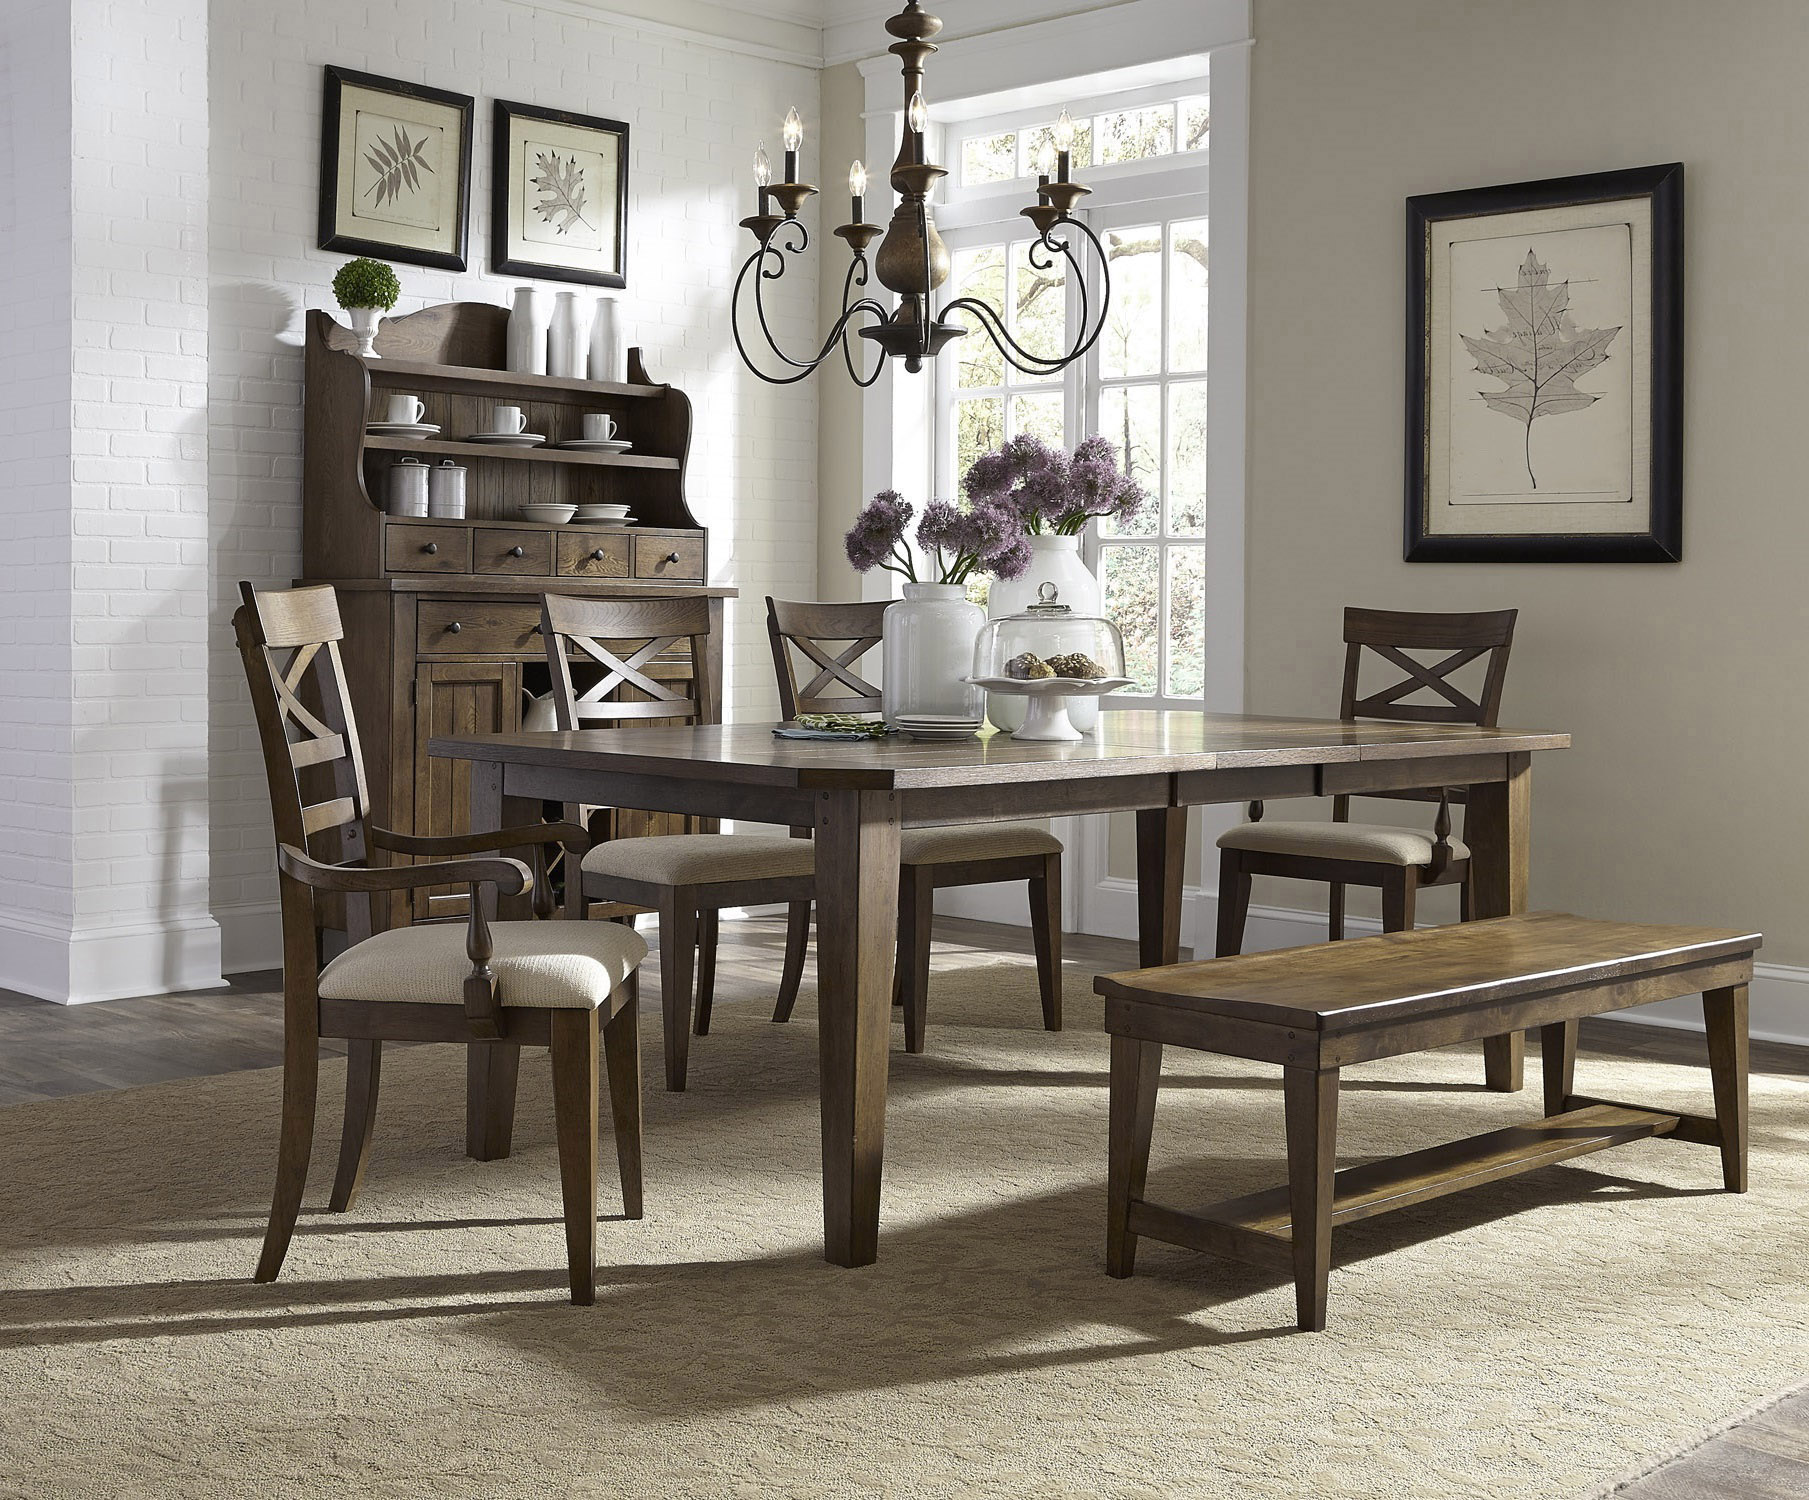 Blue Ridge Entire Collection Pic 3 ( Heading Dining Set With X Back Chairs ).jpg